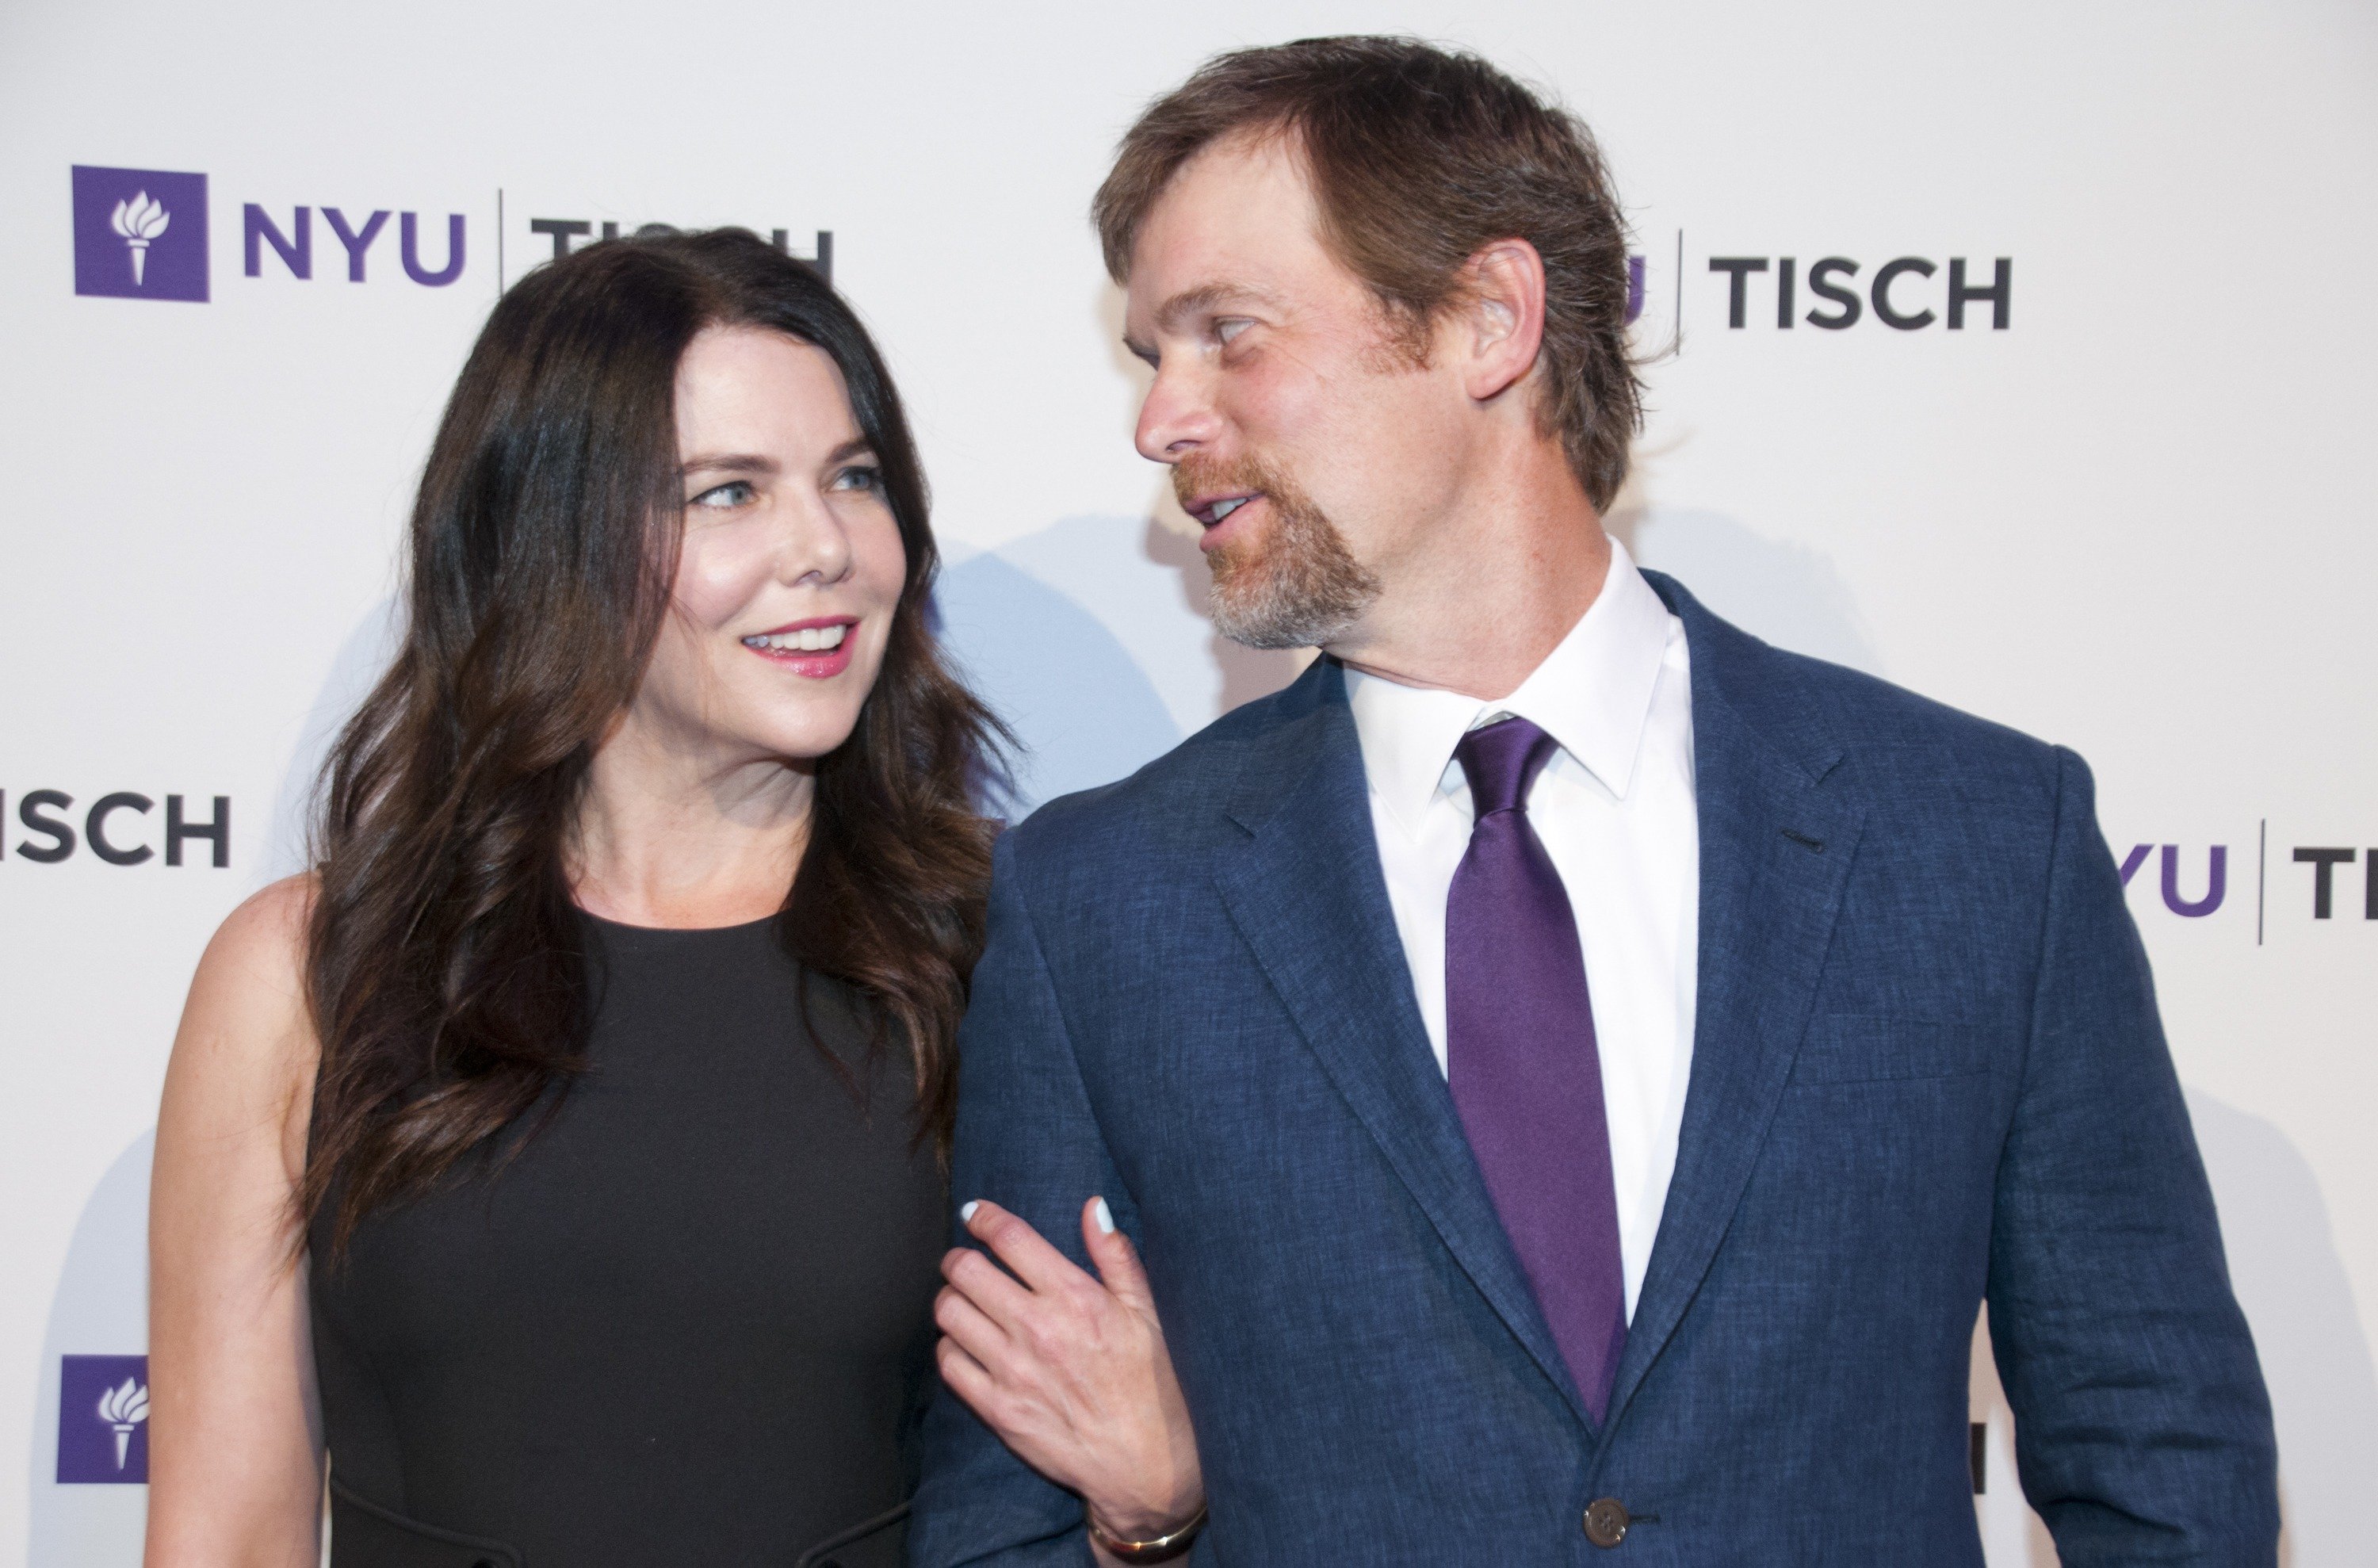 Lauren Graham and Peter Krause pose side by side and look at each other during an event at New York University.